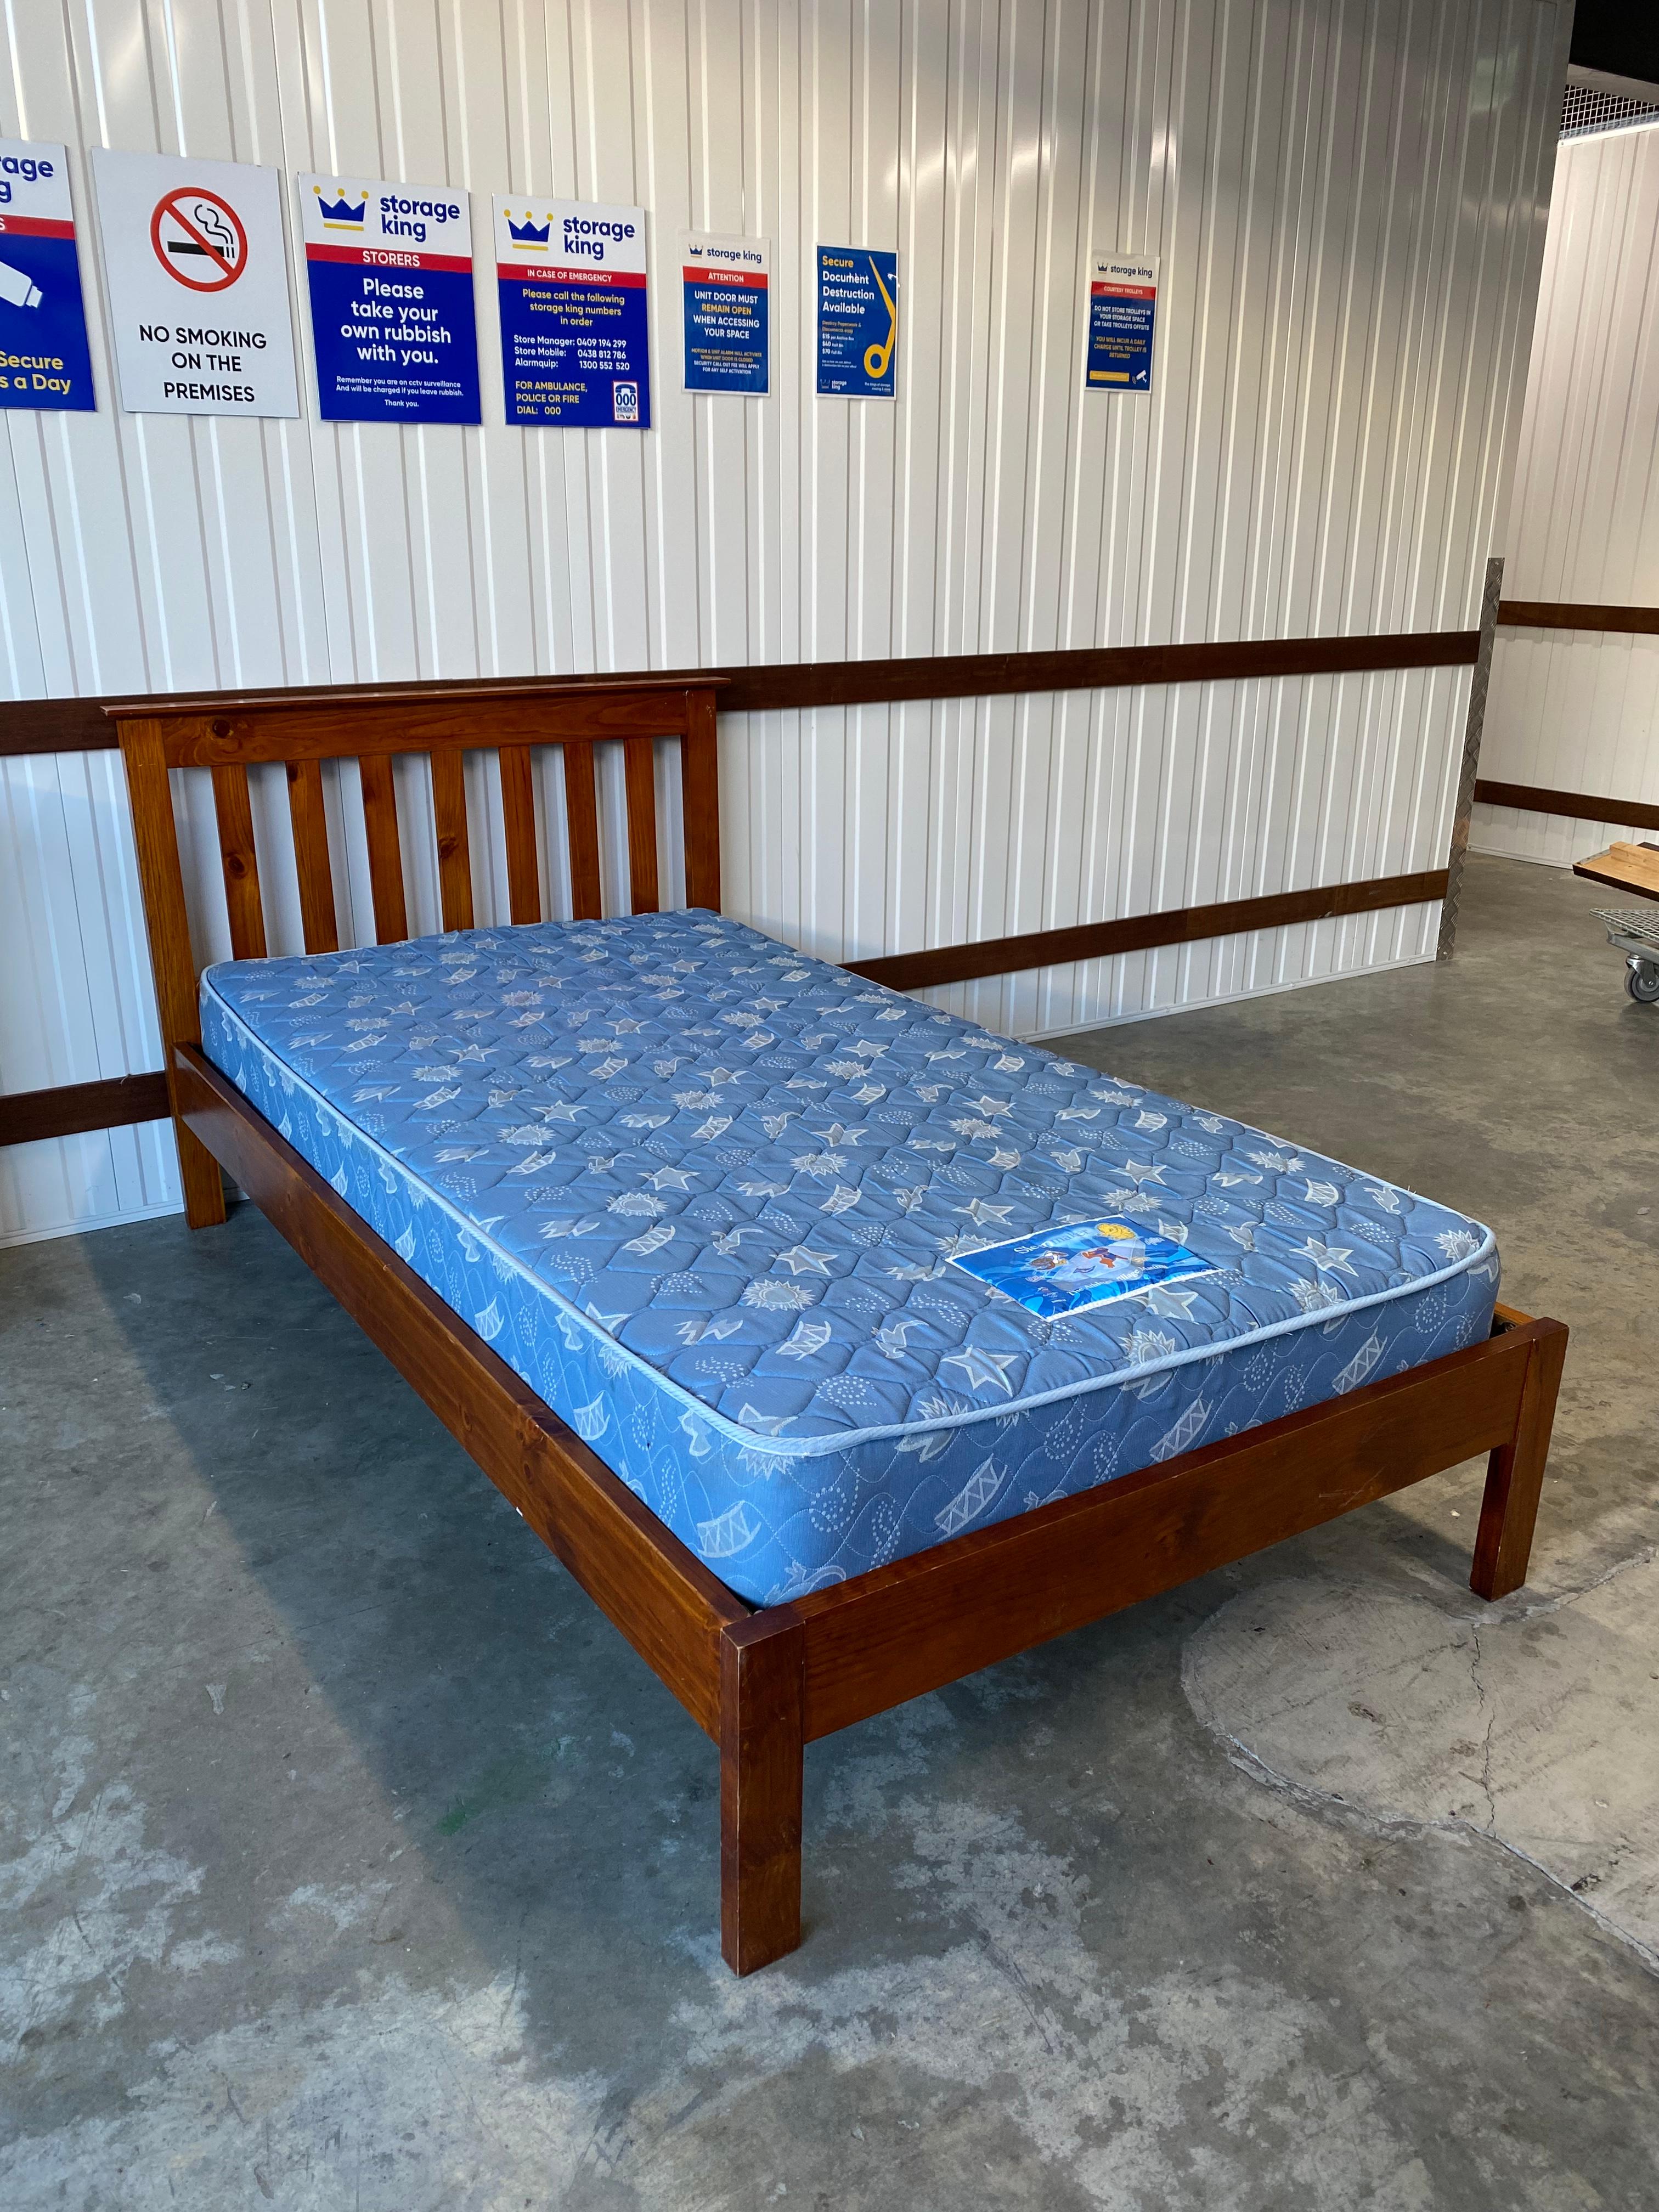 King Single Bed and Blue Mattress Wooden